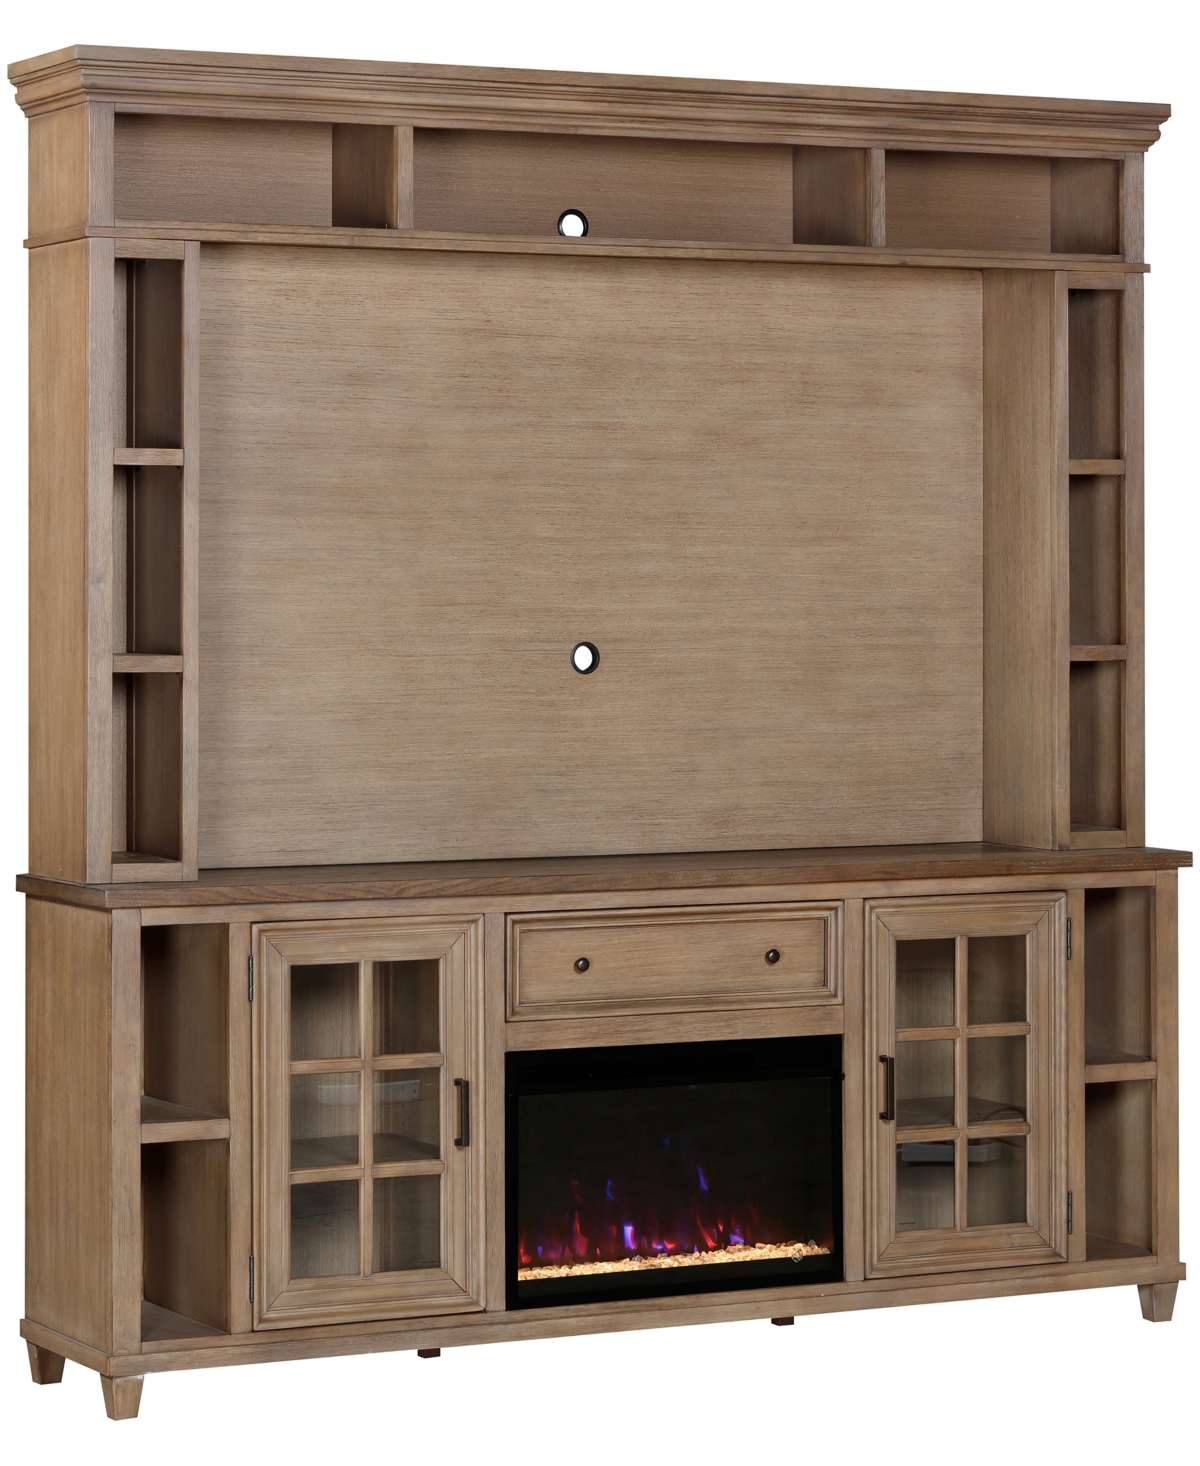 Macy's 84" Dawnwood 3pc Tv Console Set (84" Console, Hutch And Fireplace) In Wheat